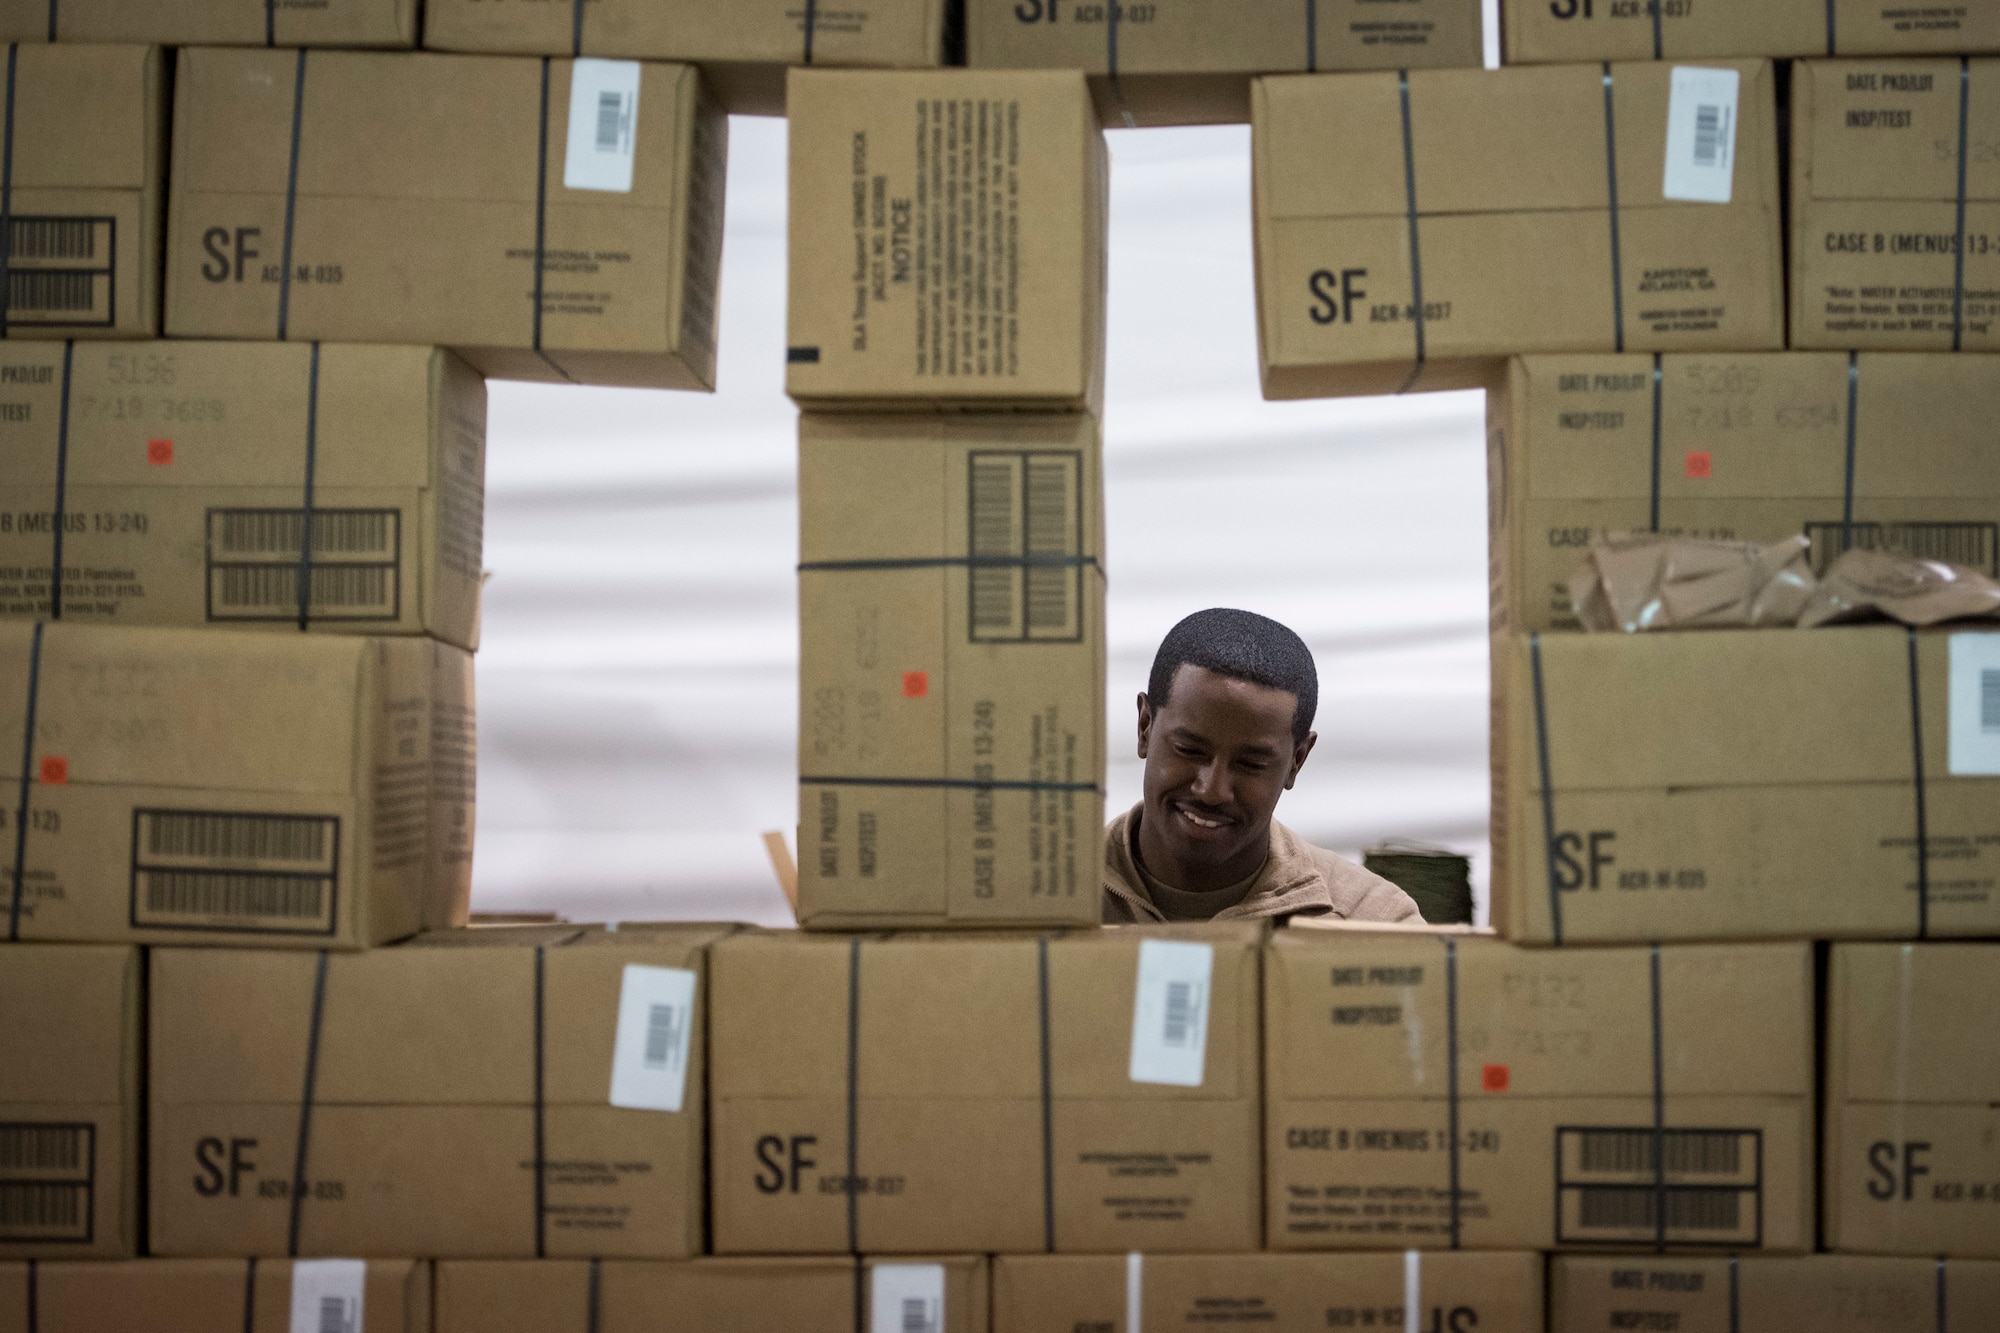 Staff Sgt. Terrell Perryman, 824th Base Defense Squadron supply liaison, laughs while taking inventory during a Mission Readiness Exercise, March 13, 2018, at Joint Base McGuire-Dix Lakehurst, N.J. Evaluators tested the 824th BDS from Moody Air Force Base, Ga., and the 105th Security Forces Squadron from Stewart Air National Guard Base, N.Y., to ensure their combat readiness. (U.S. Air Force photo by Senior Airman Janiqua P. Robinson)